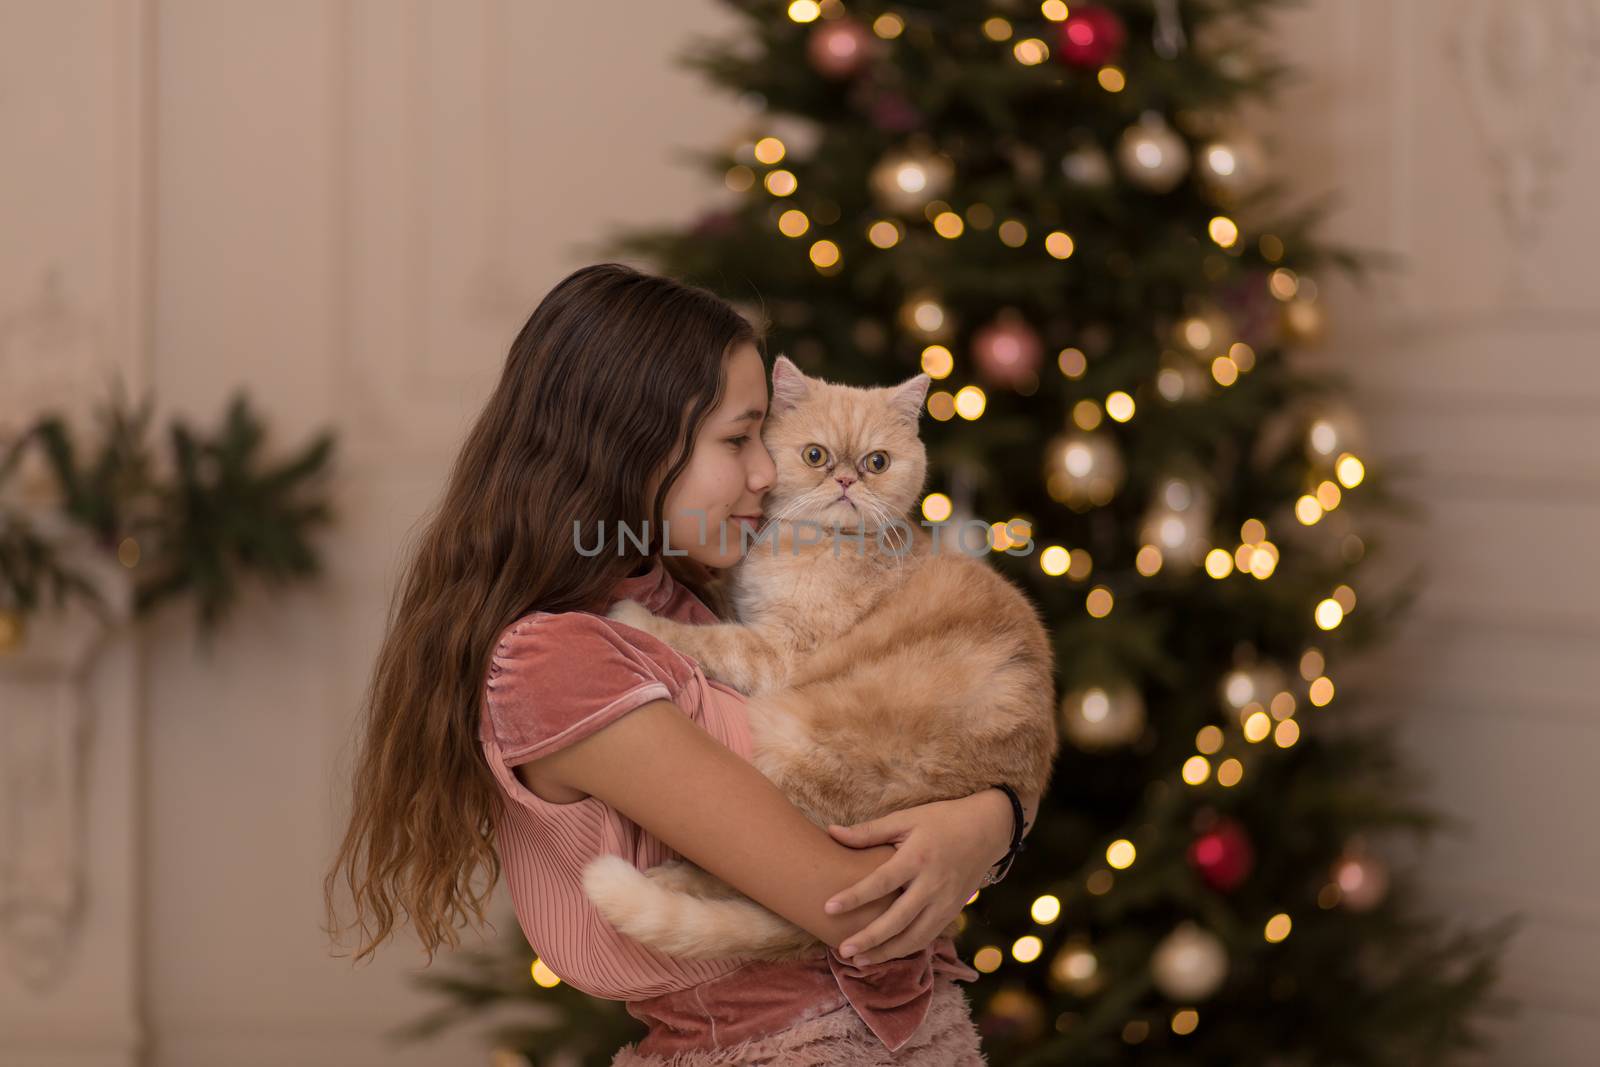 The girl spends the Christmas holidays with her cat by Try_my_best